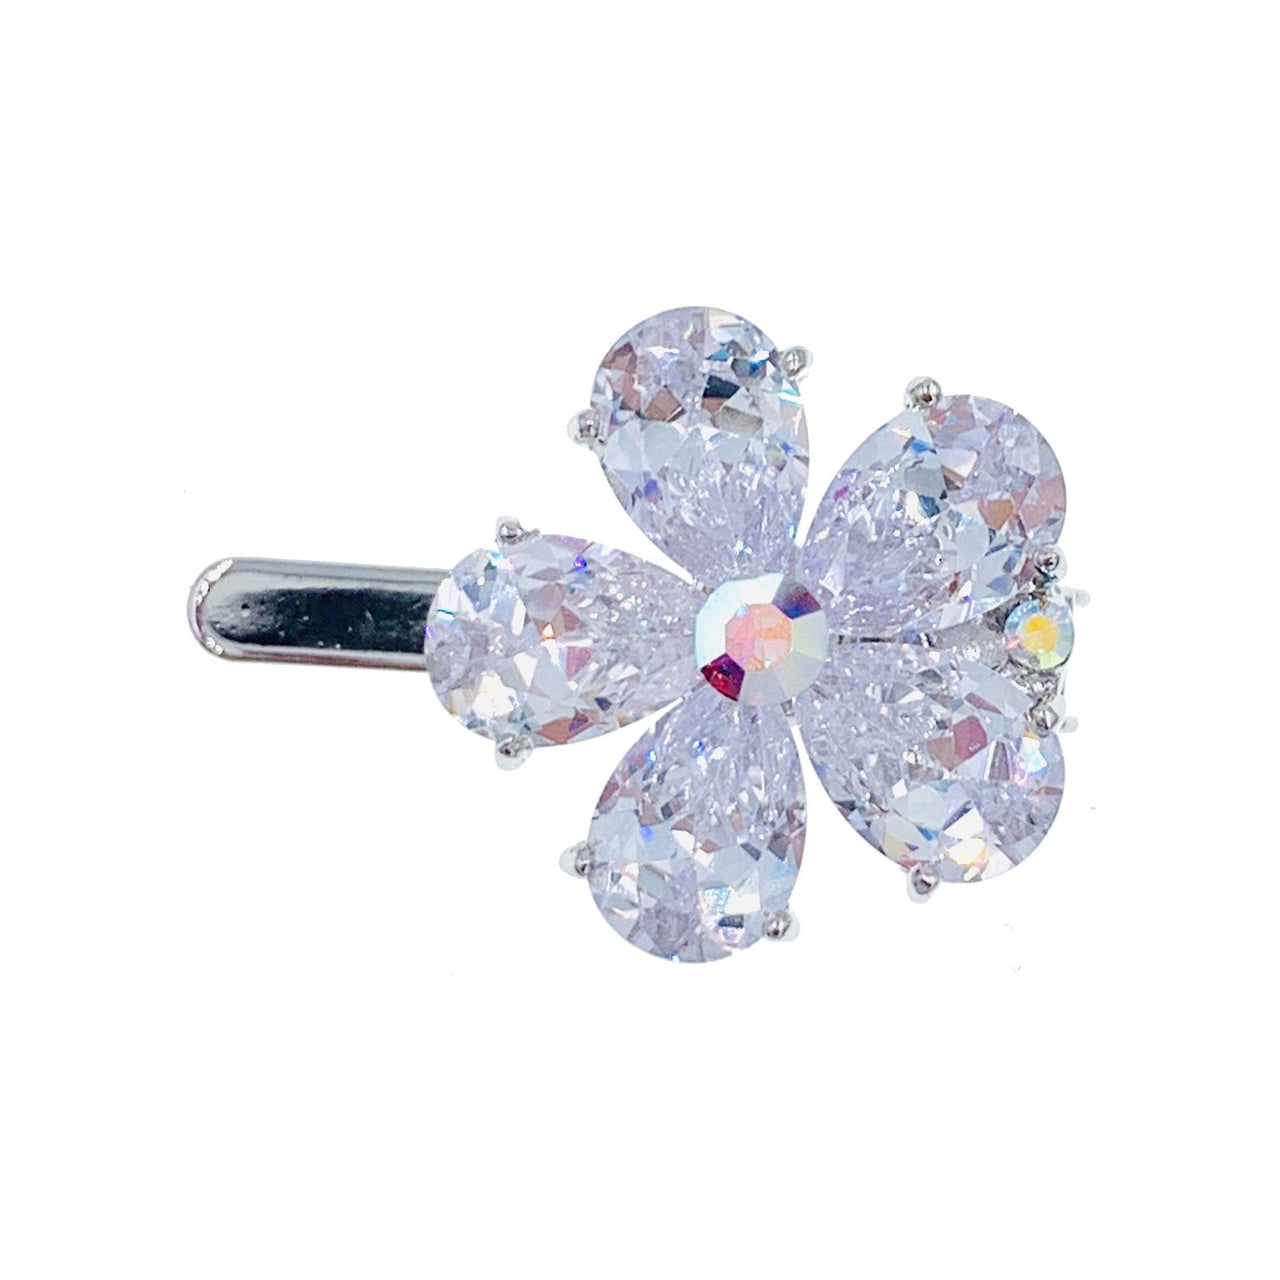 Virginiana Flower Magnetic Hair Clip use Cubic Zirconia CZ Crystal Hairpin Small Barrette, Magnetic Clip - MOGHANT